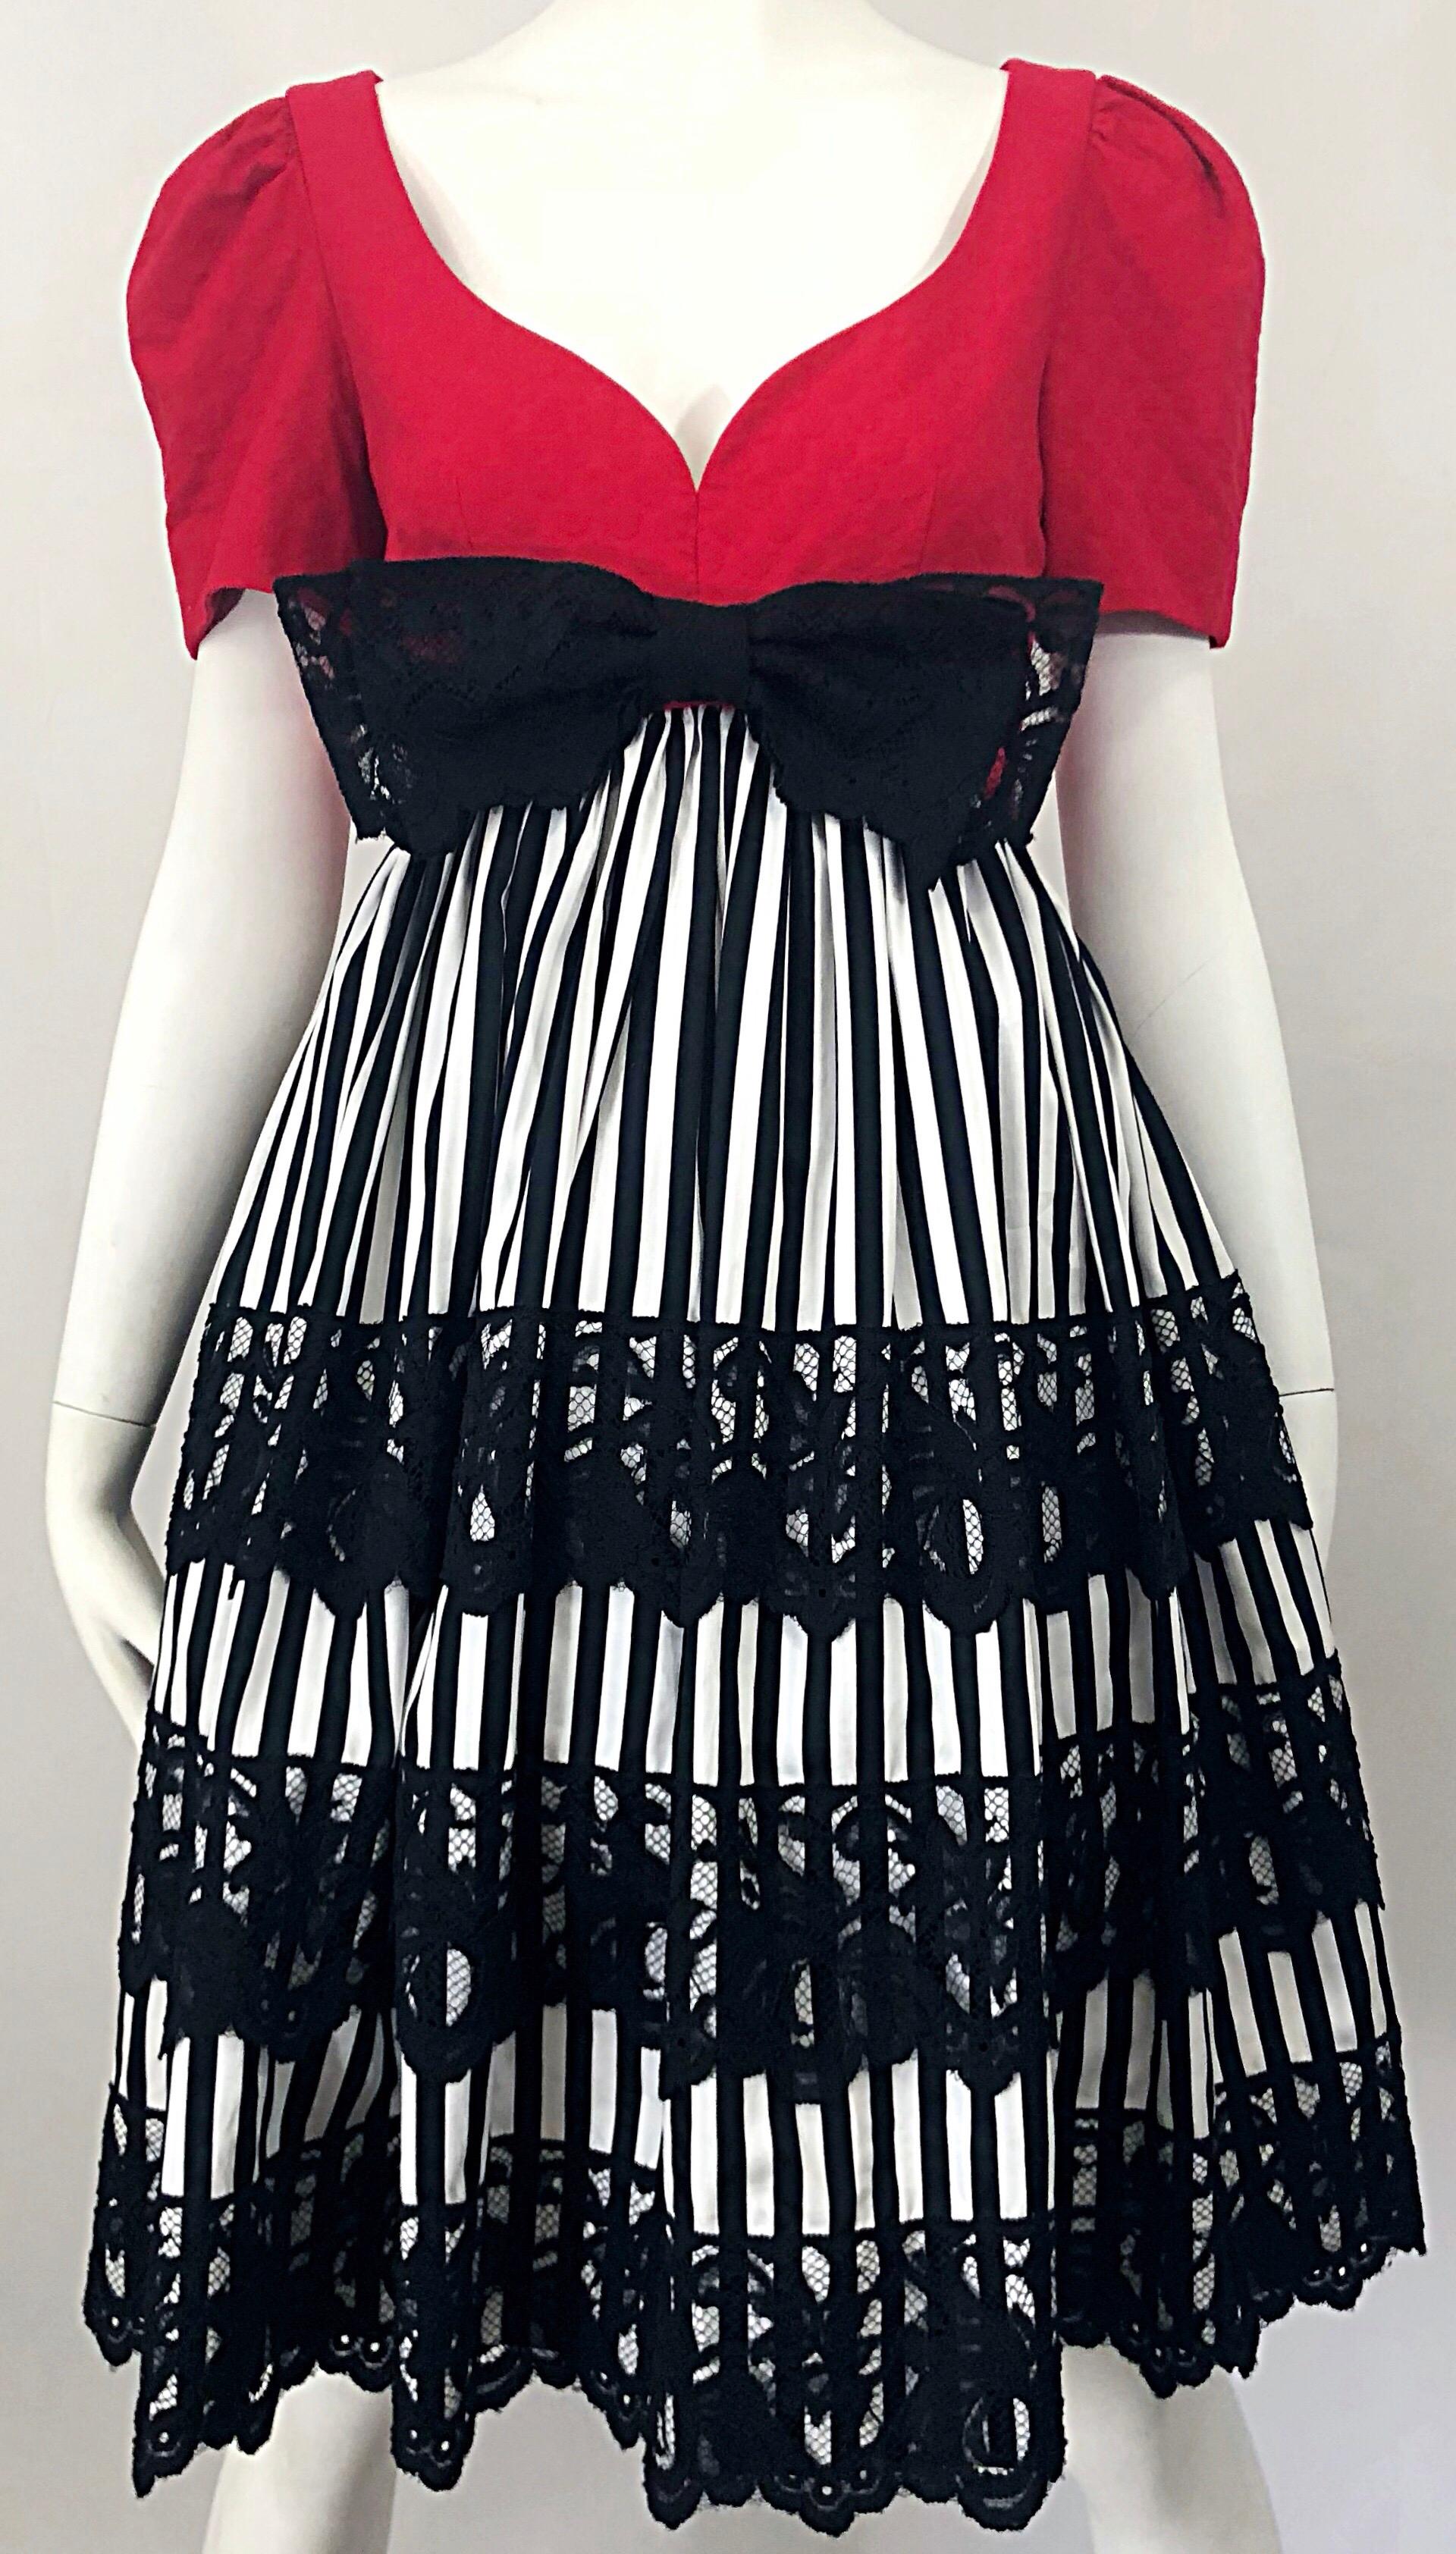 Vintage Adele Simpson 1980s Red Black White Fit n' Flare Empire Bow Lace Dress 1